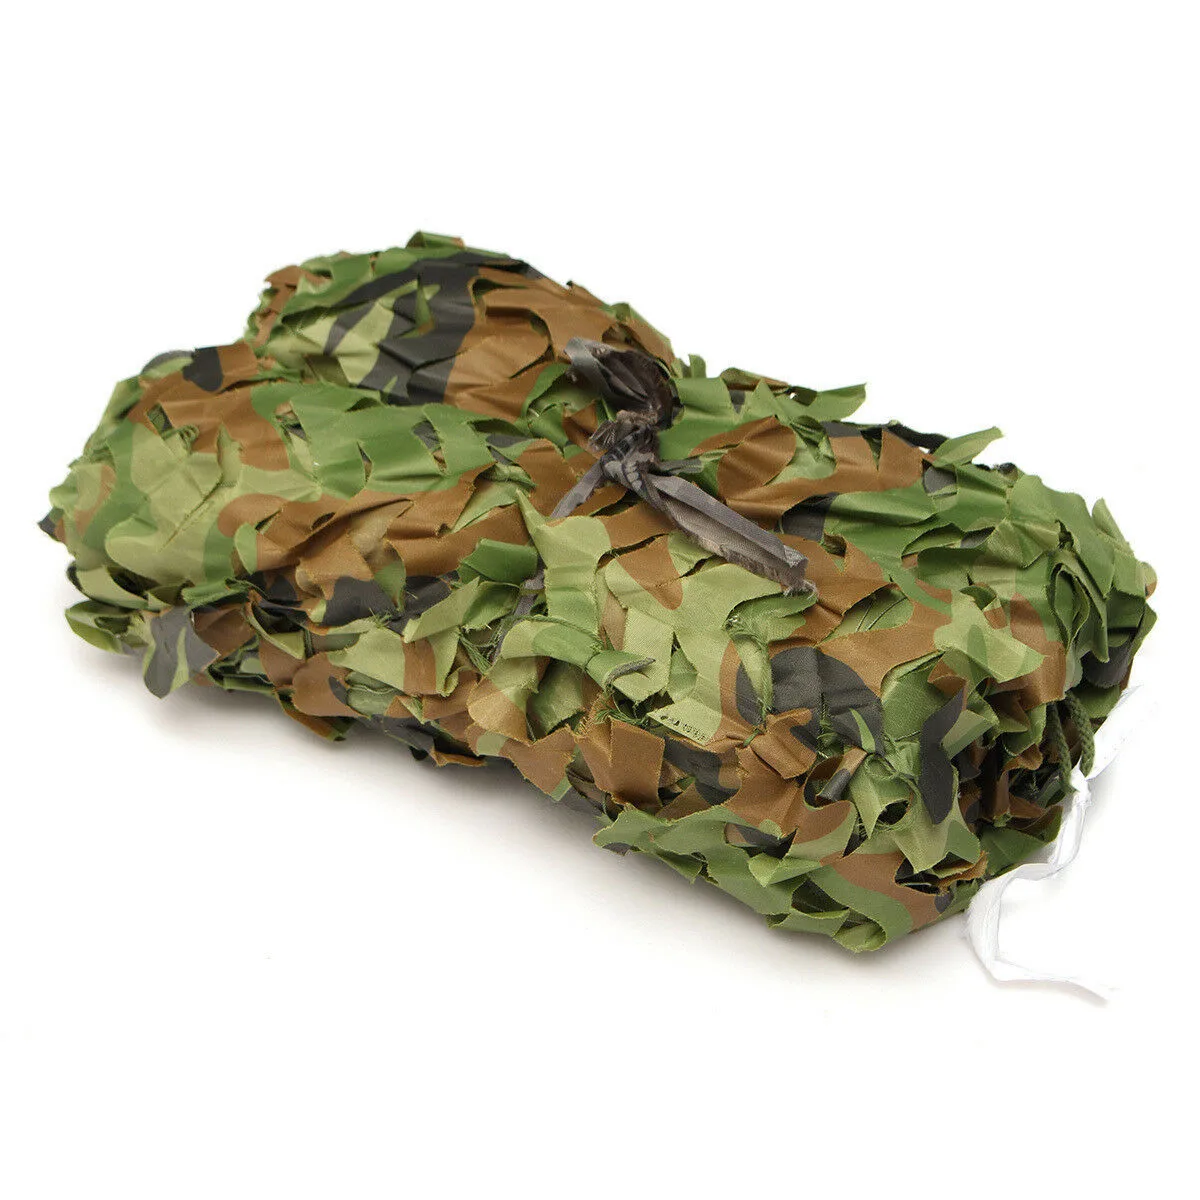 Mr.Garden® Hunting Camouflage Net for Camping Military Hunting,20x20ft 